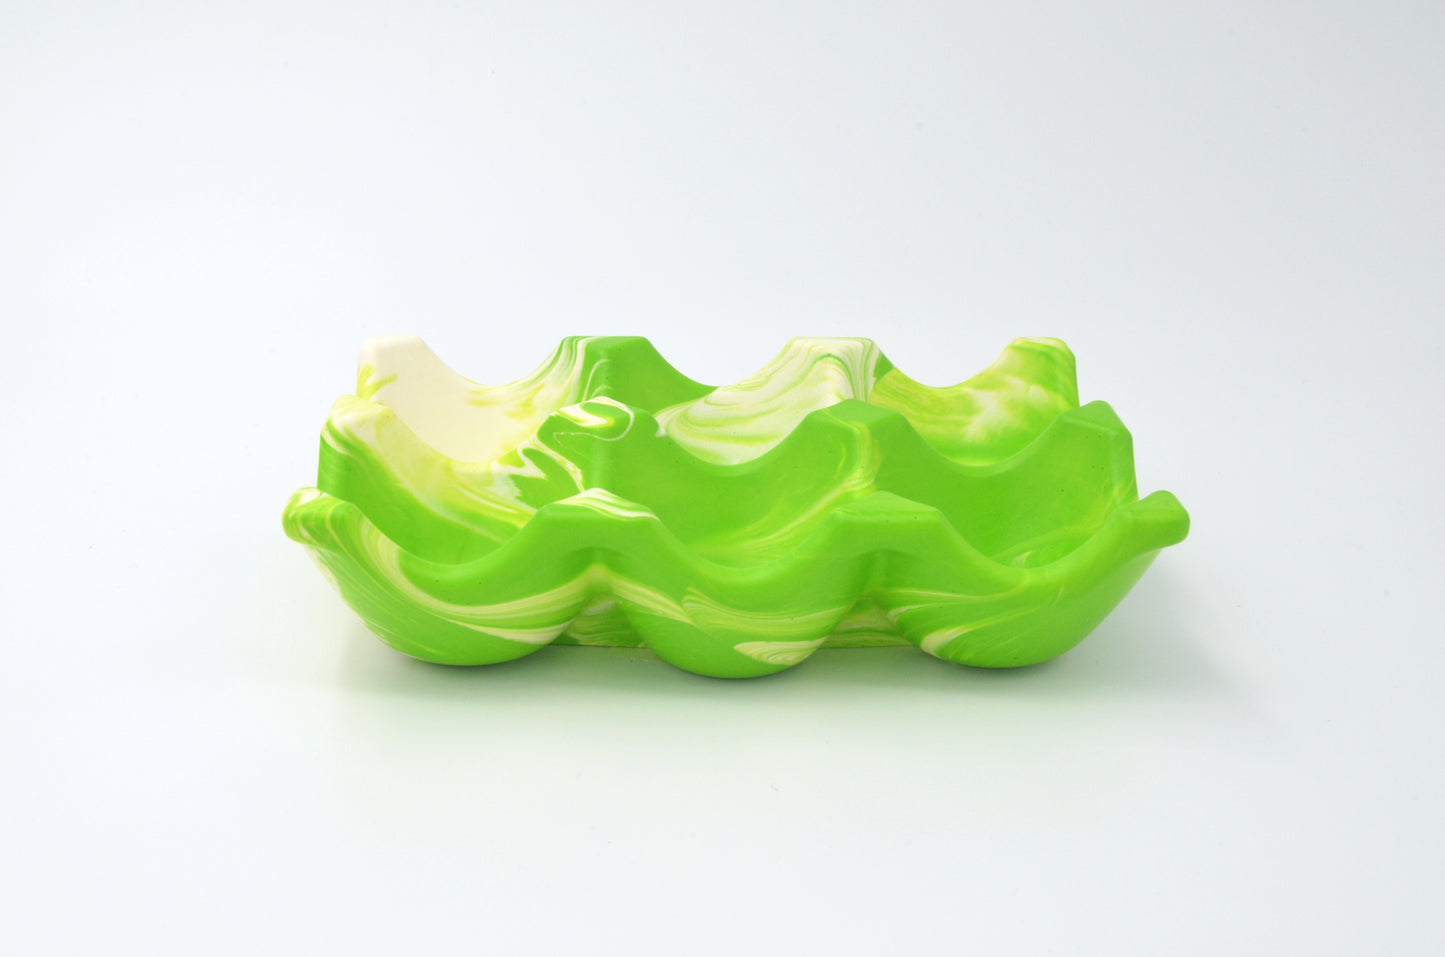 Countertop Egg Holder in Green and White